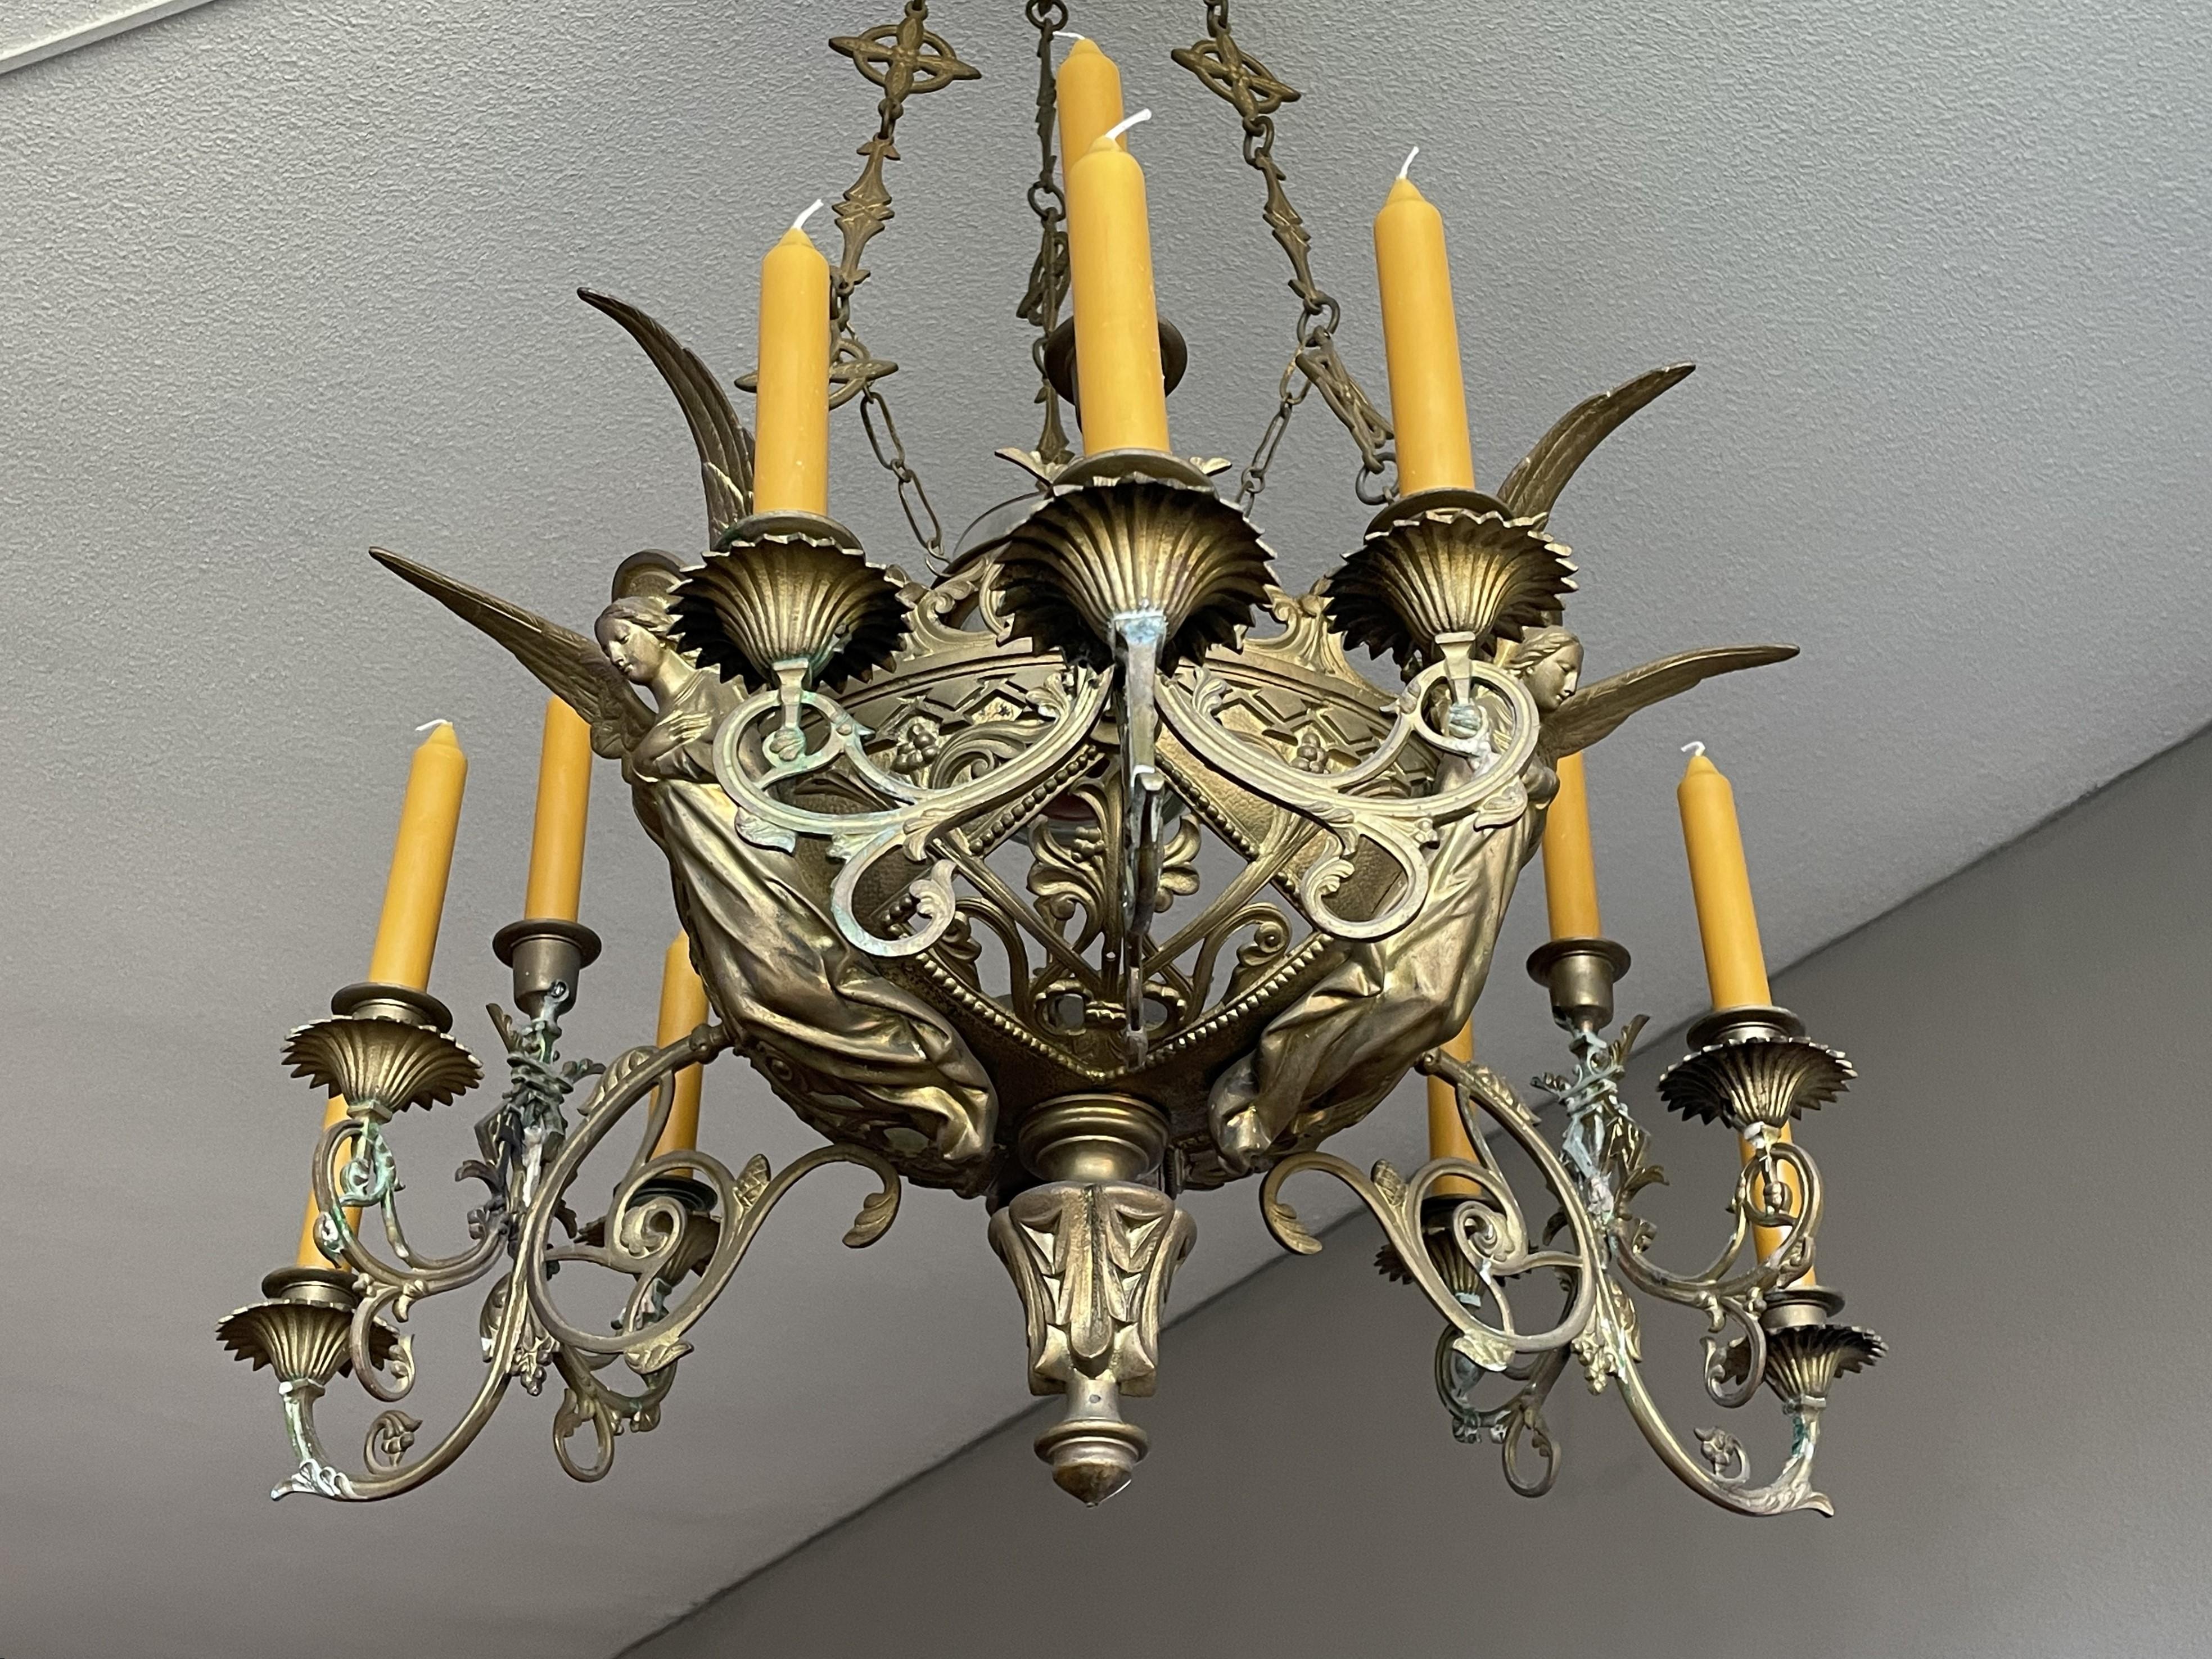 Bronze Gothic Revival Candle Chandelier w. Virgin Mary & Marian Cross Sculptures For Sale 6